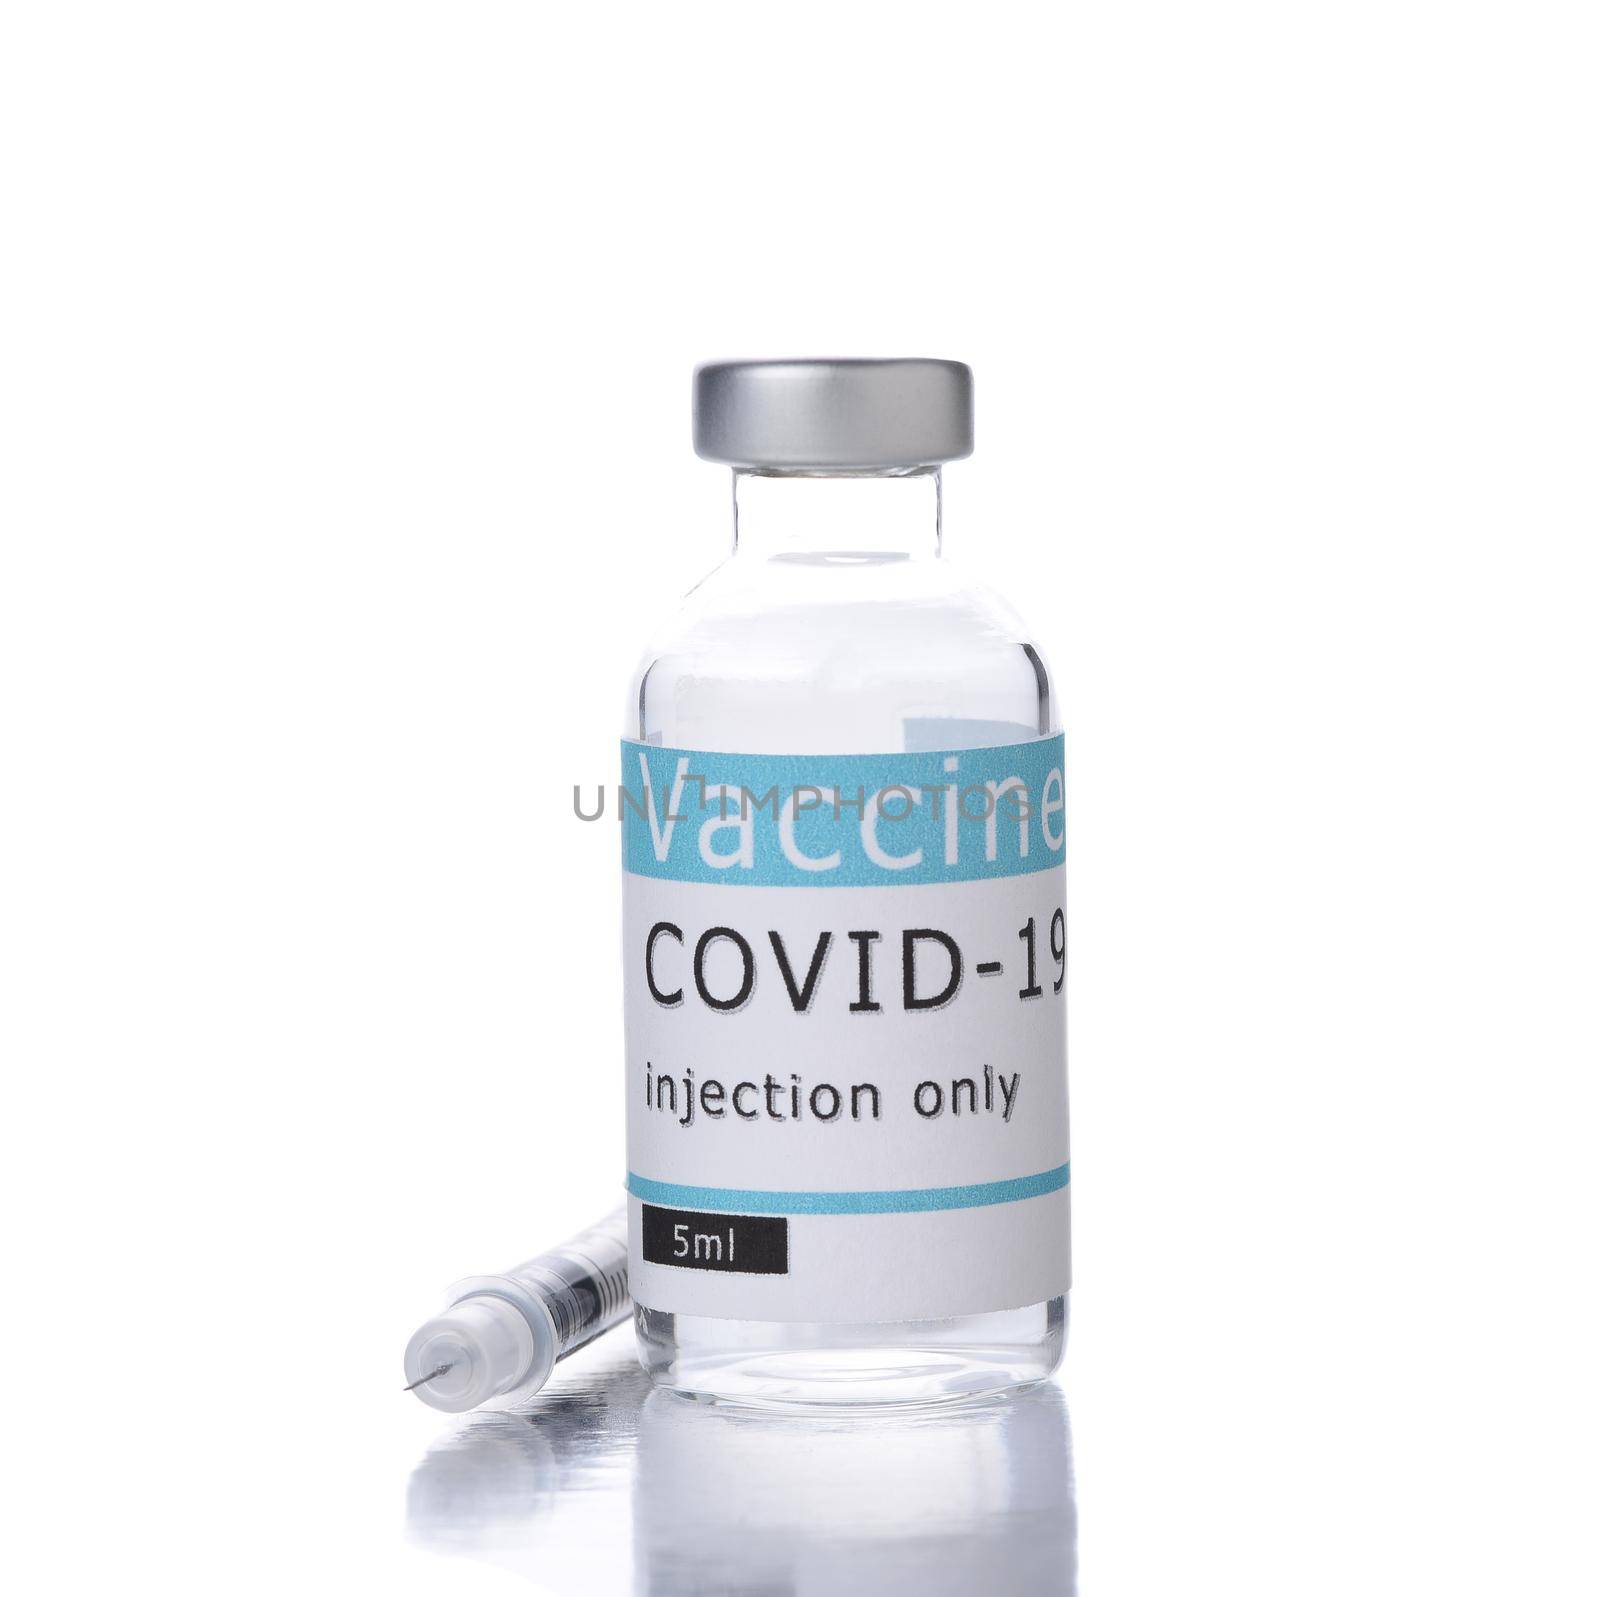 A Covid-19 Vaccine vial and syringe on white.